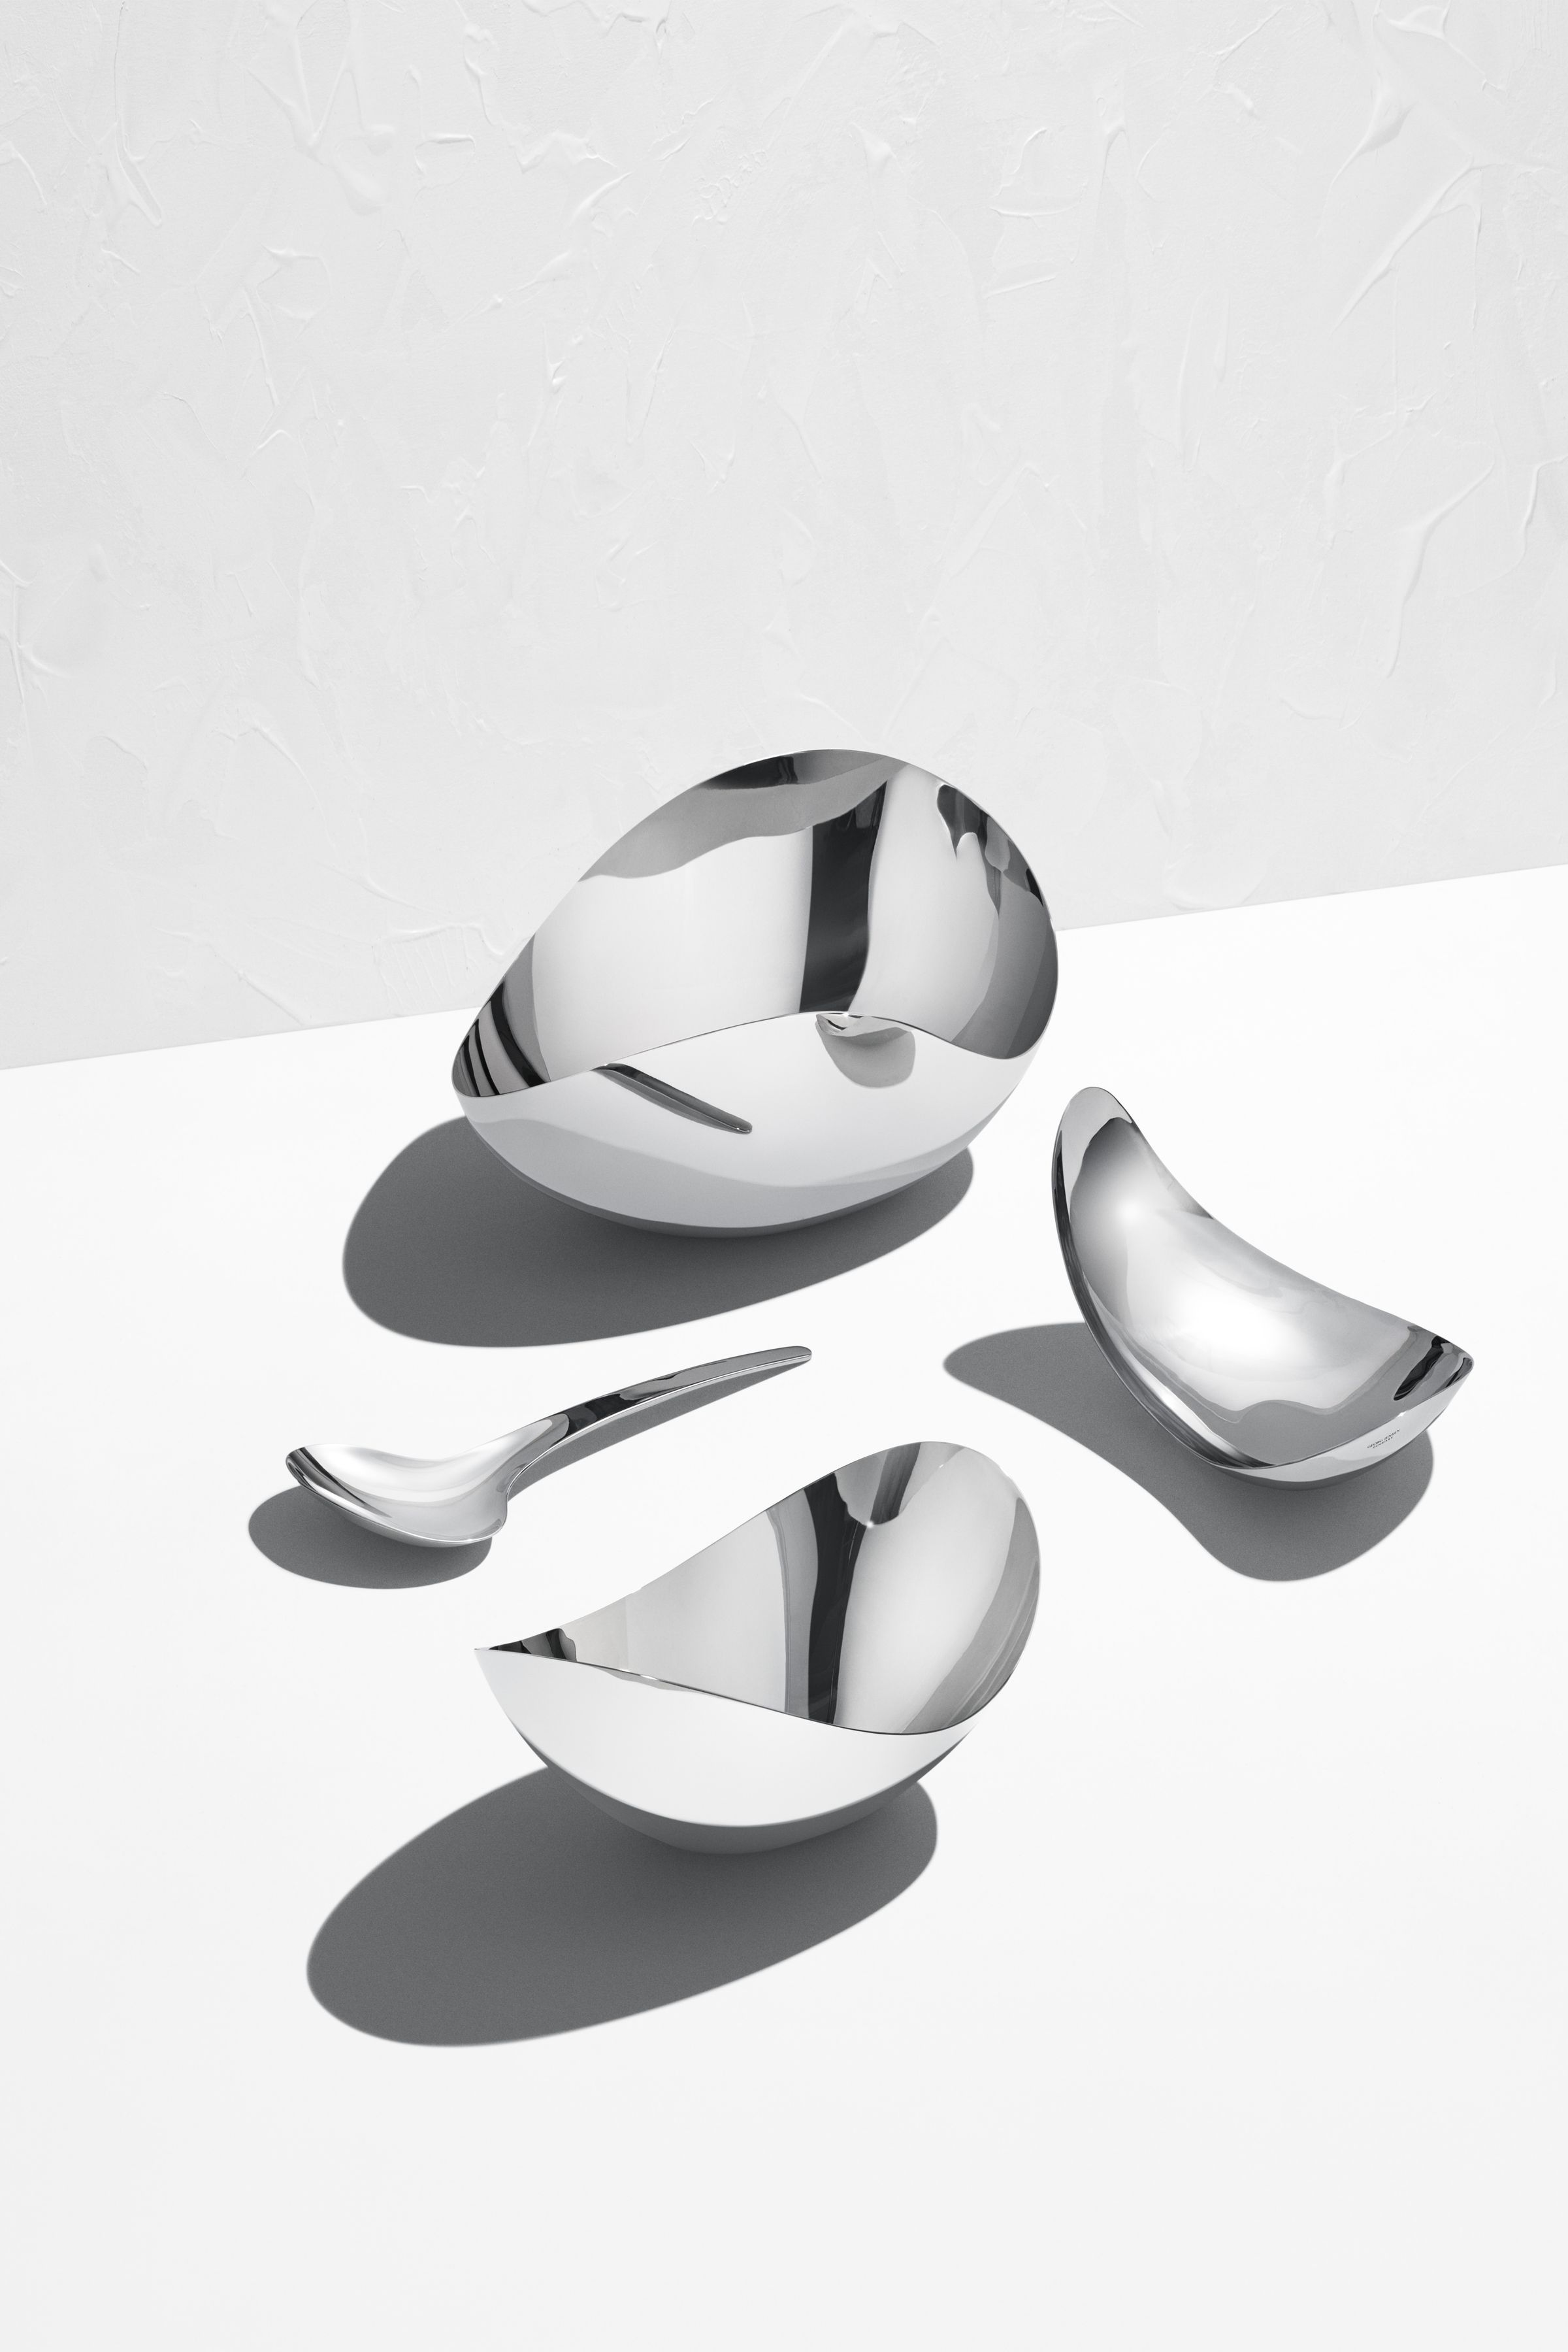 Georg Jensen Living Bloom collection art direction photography